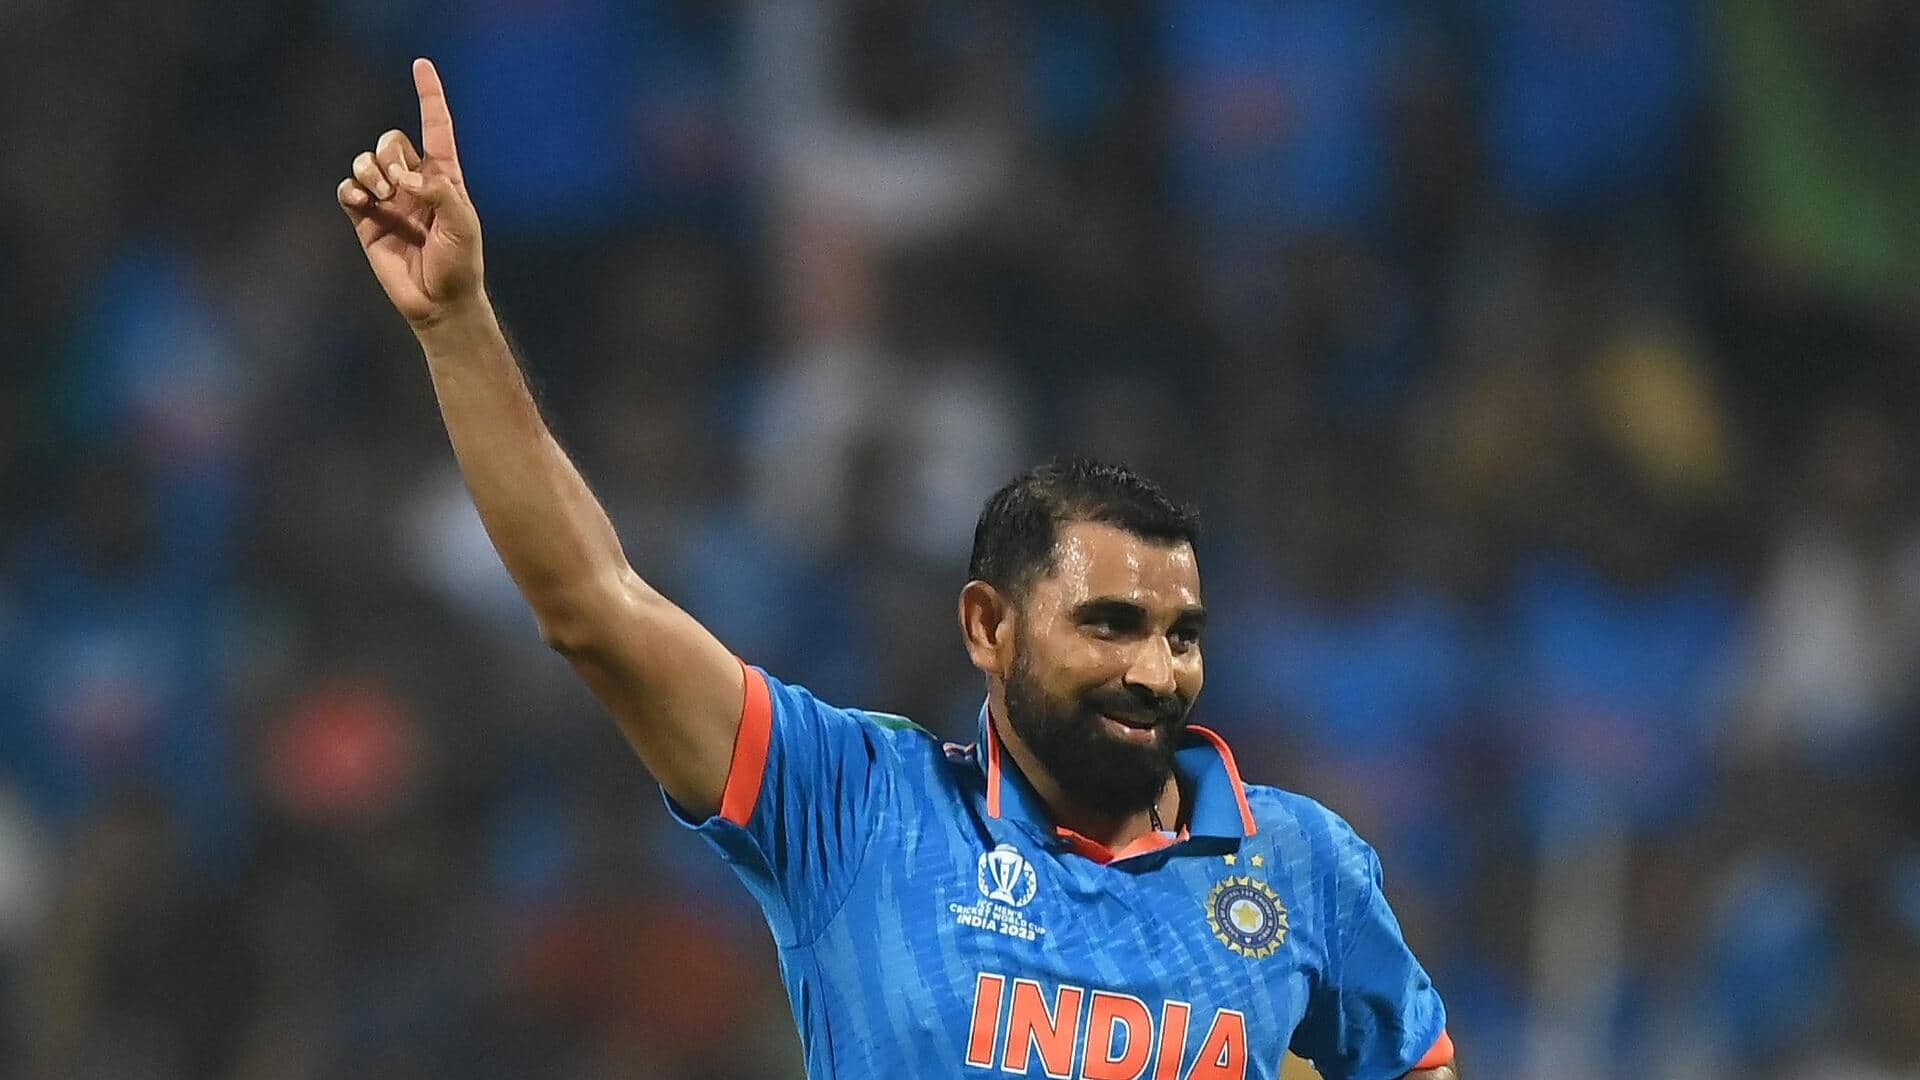 Mohammed Shami scripts ODI World Cup history for India: Stats